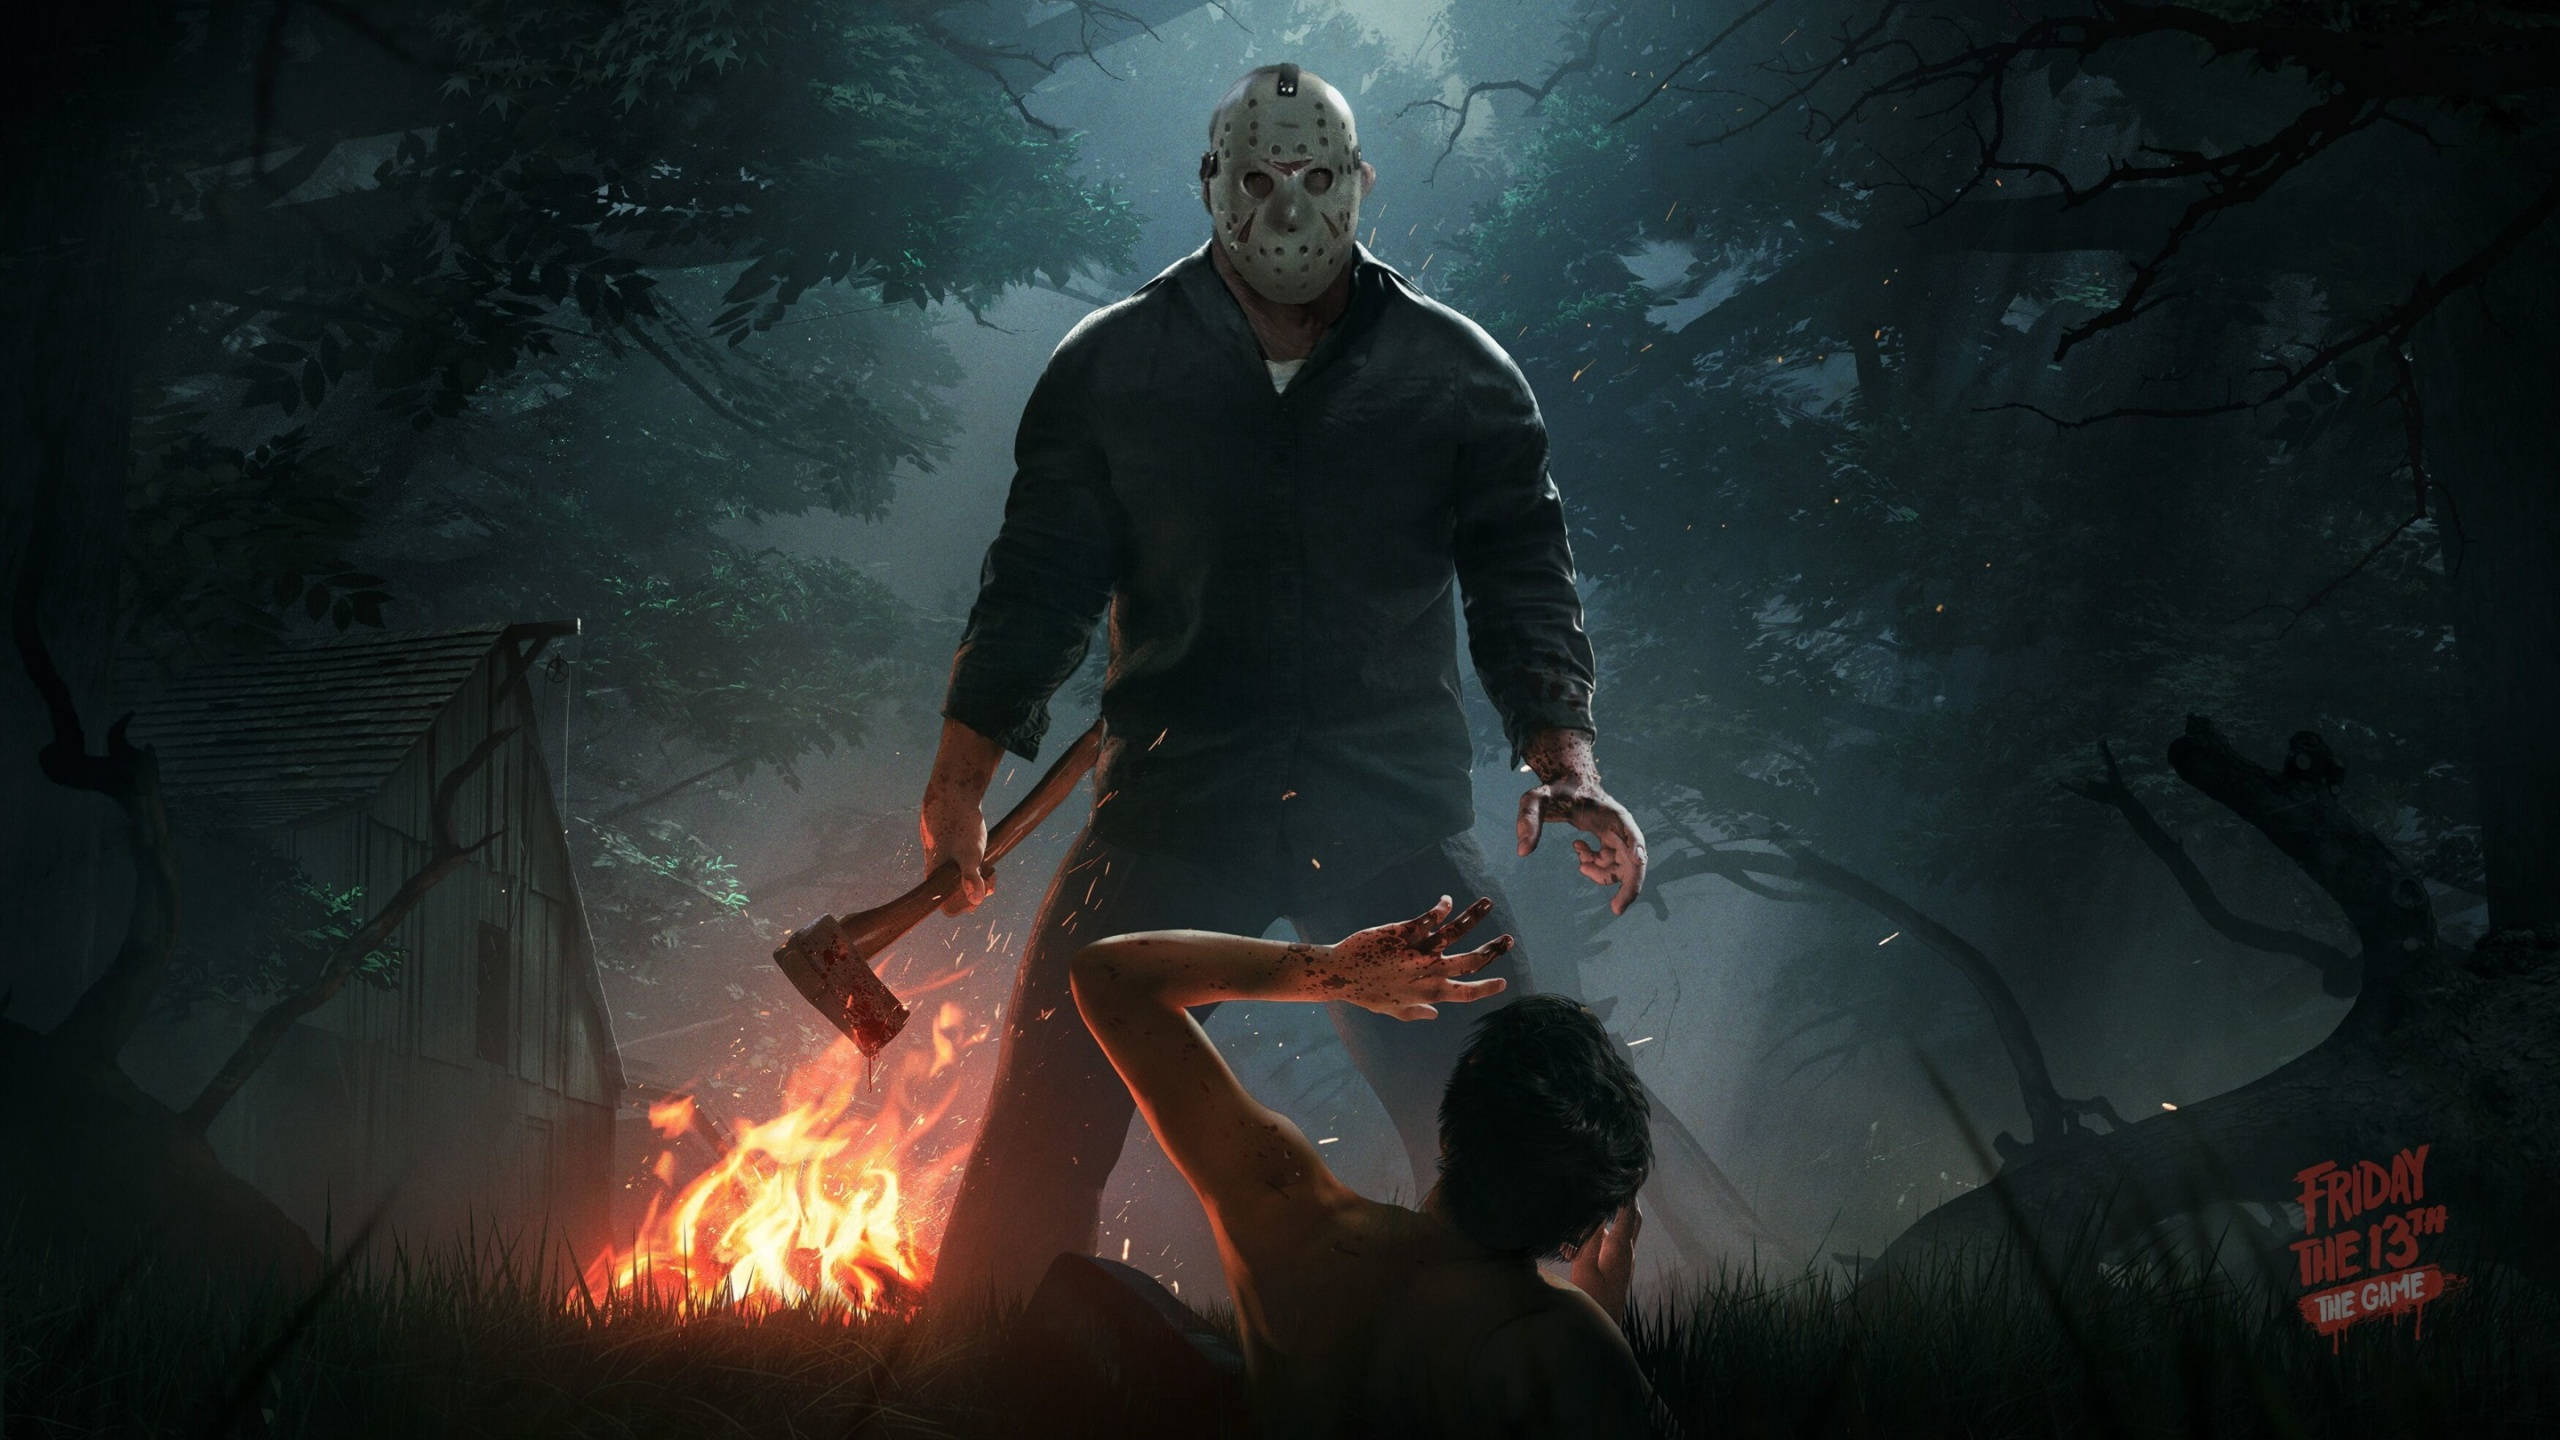 2560x1440 Gaming Friday The 13th Game Wallpaper